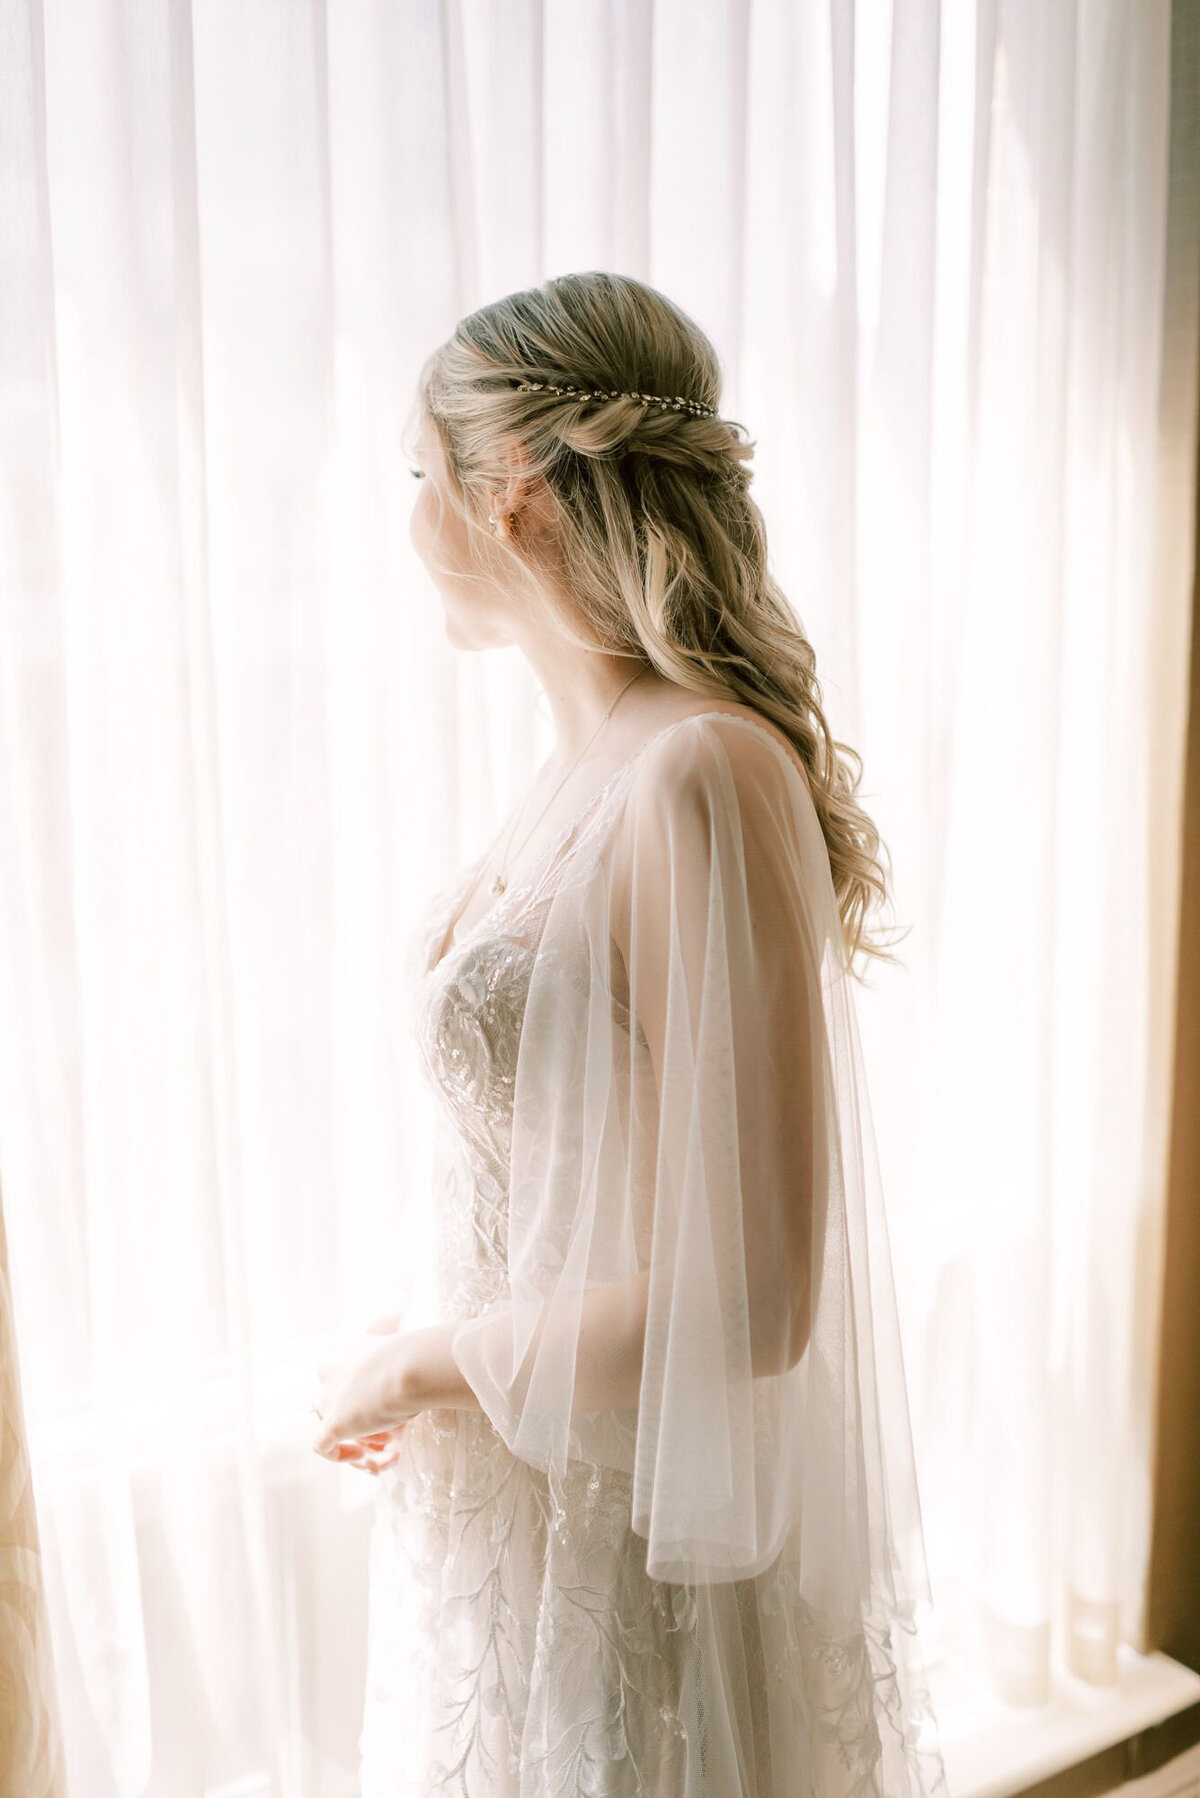 Stunning bridal portrait by Kaity Body Photography, elegant film inspired wedding photographer in Calgary, Alberta. Featured on the Bronte Bride Vendor Guide.